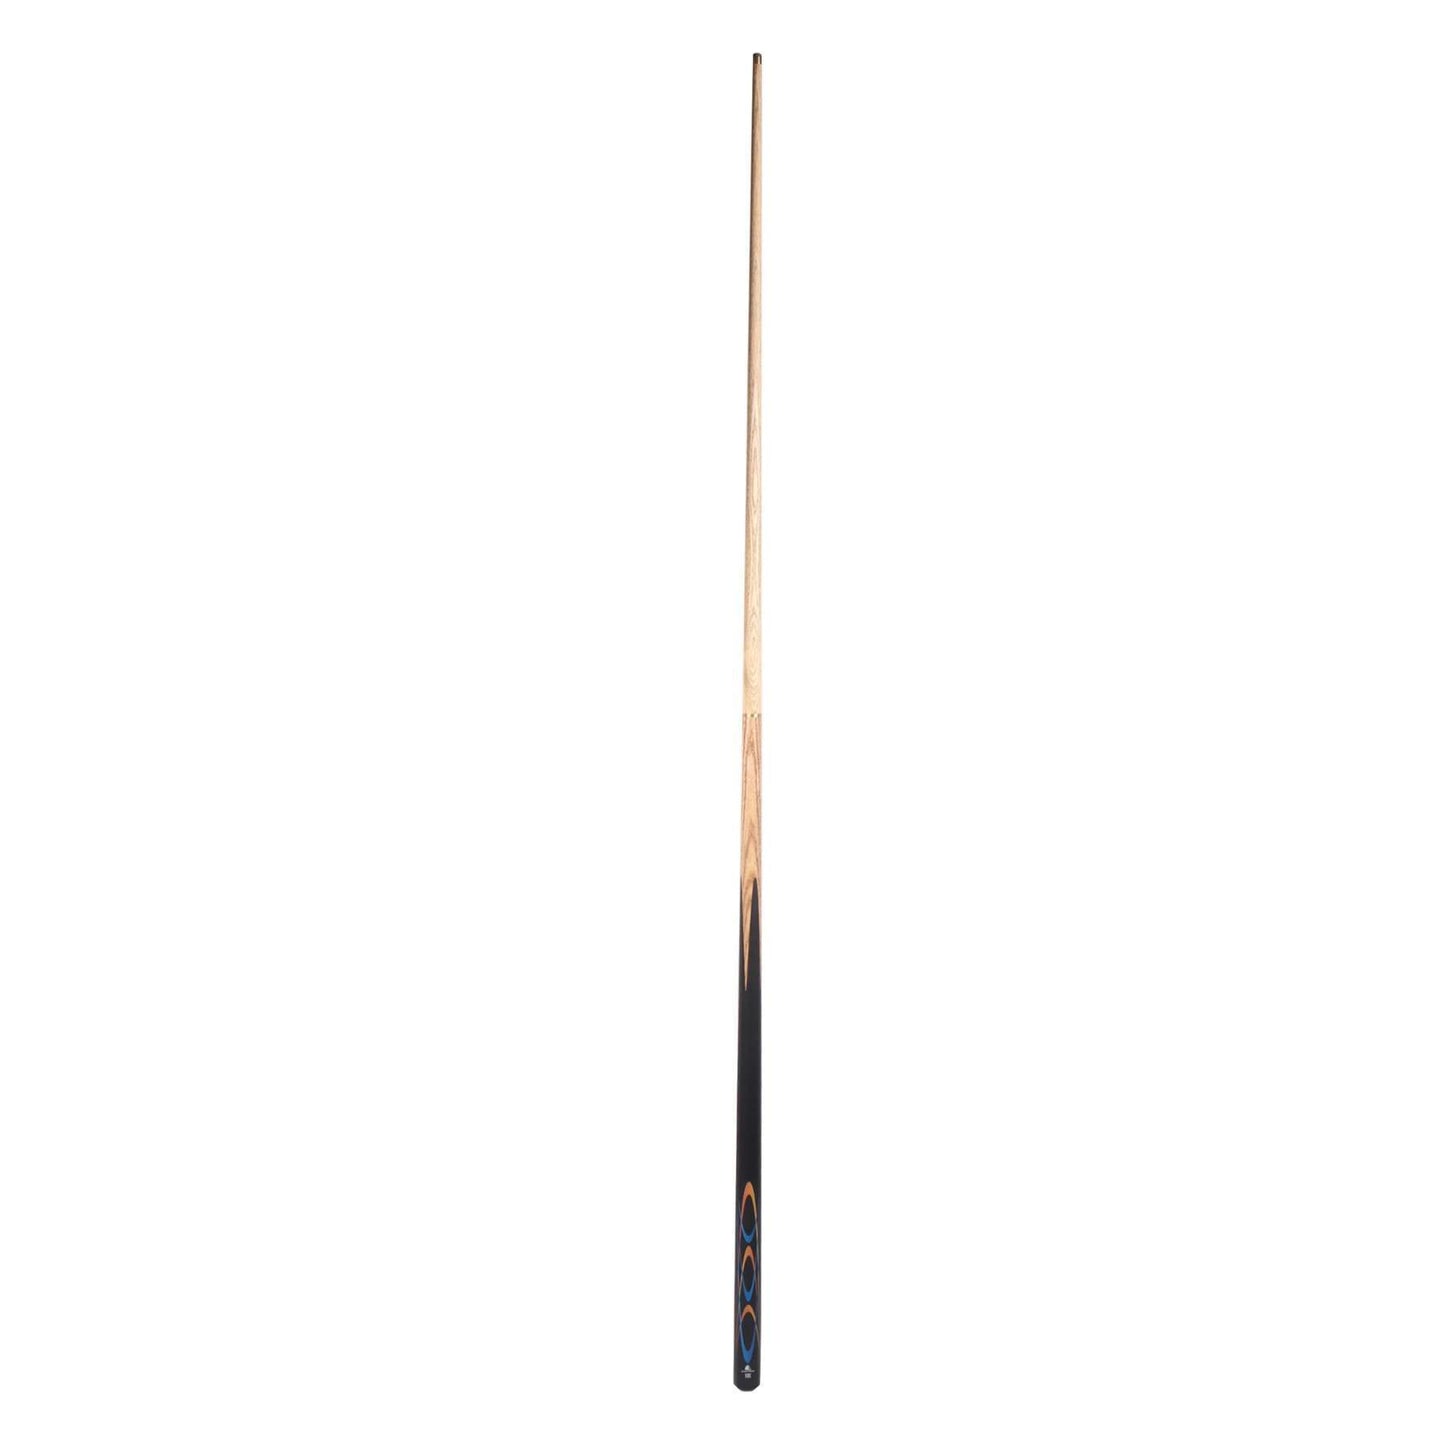 Powerglide Vibe Snooker Cue 2 Piece 10mm Tip